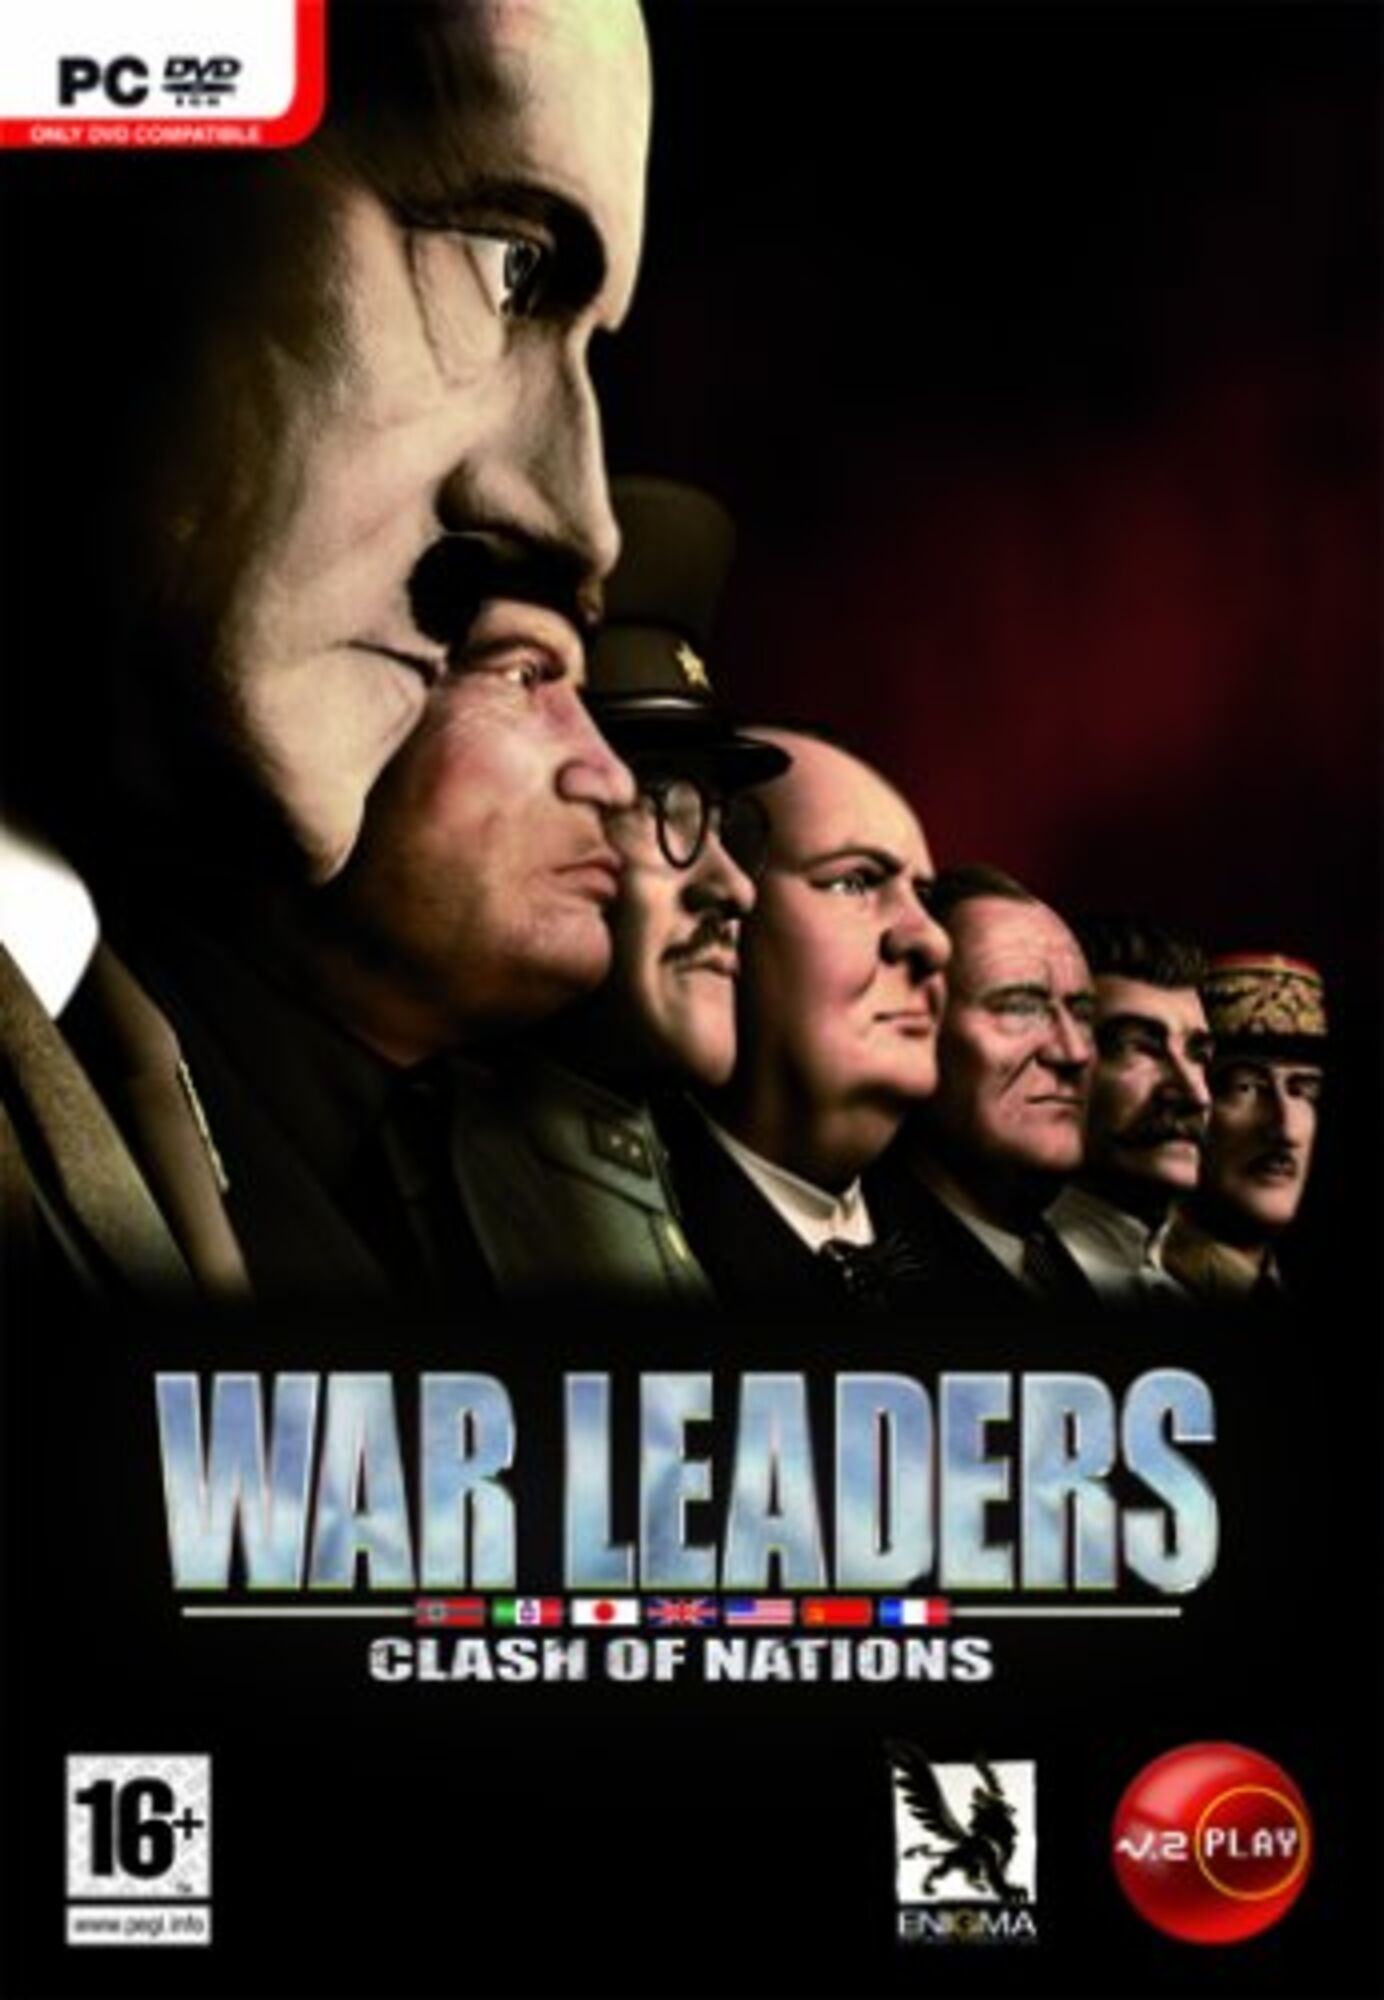 War Leaders Clash of Nations PC